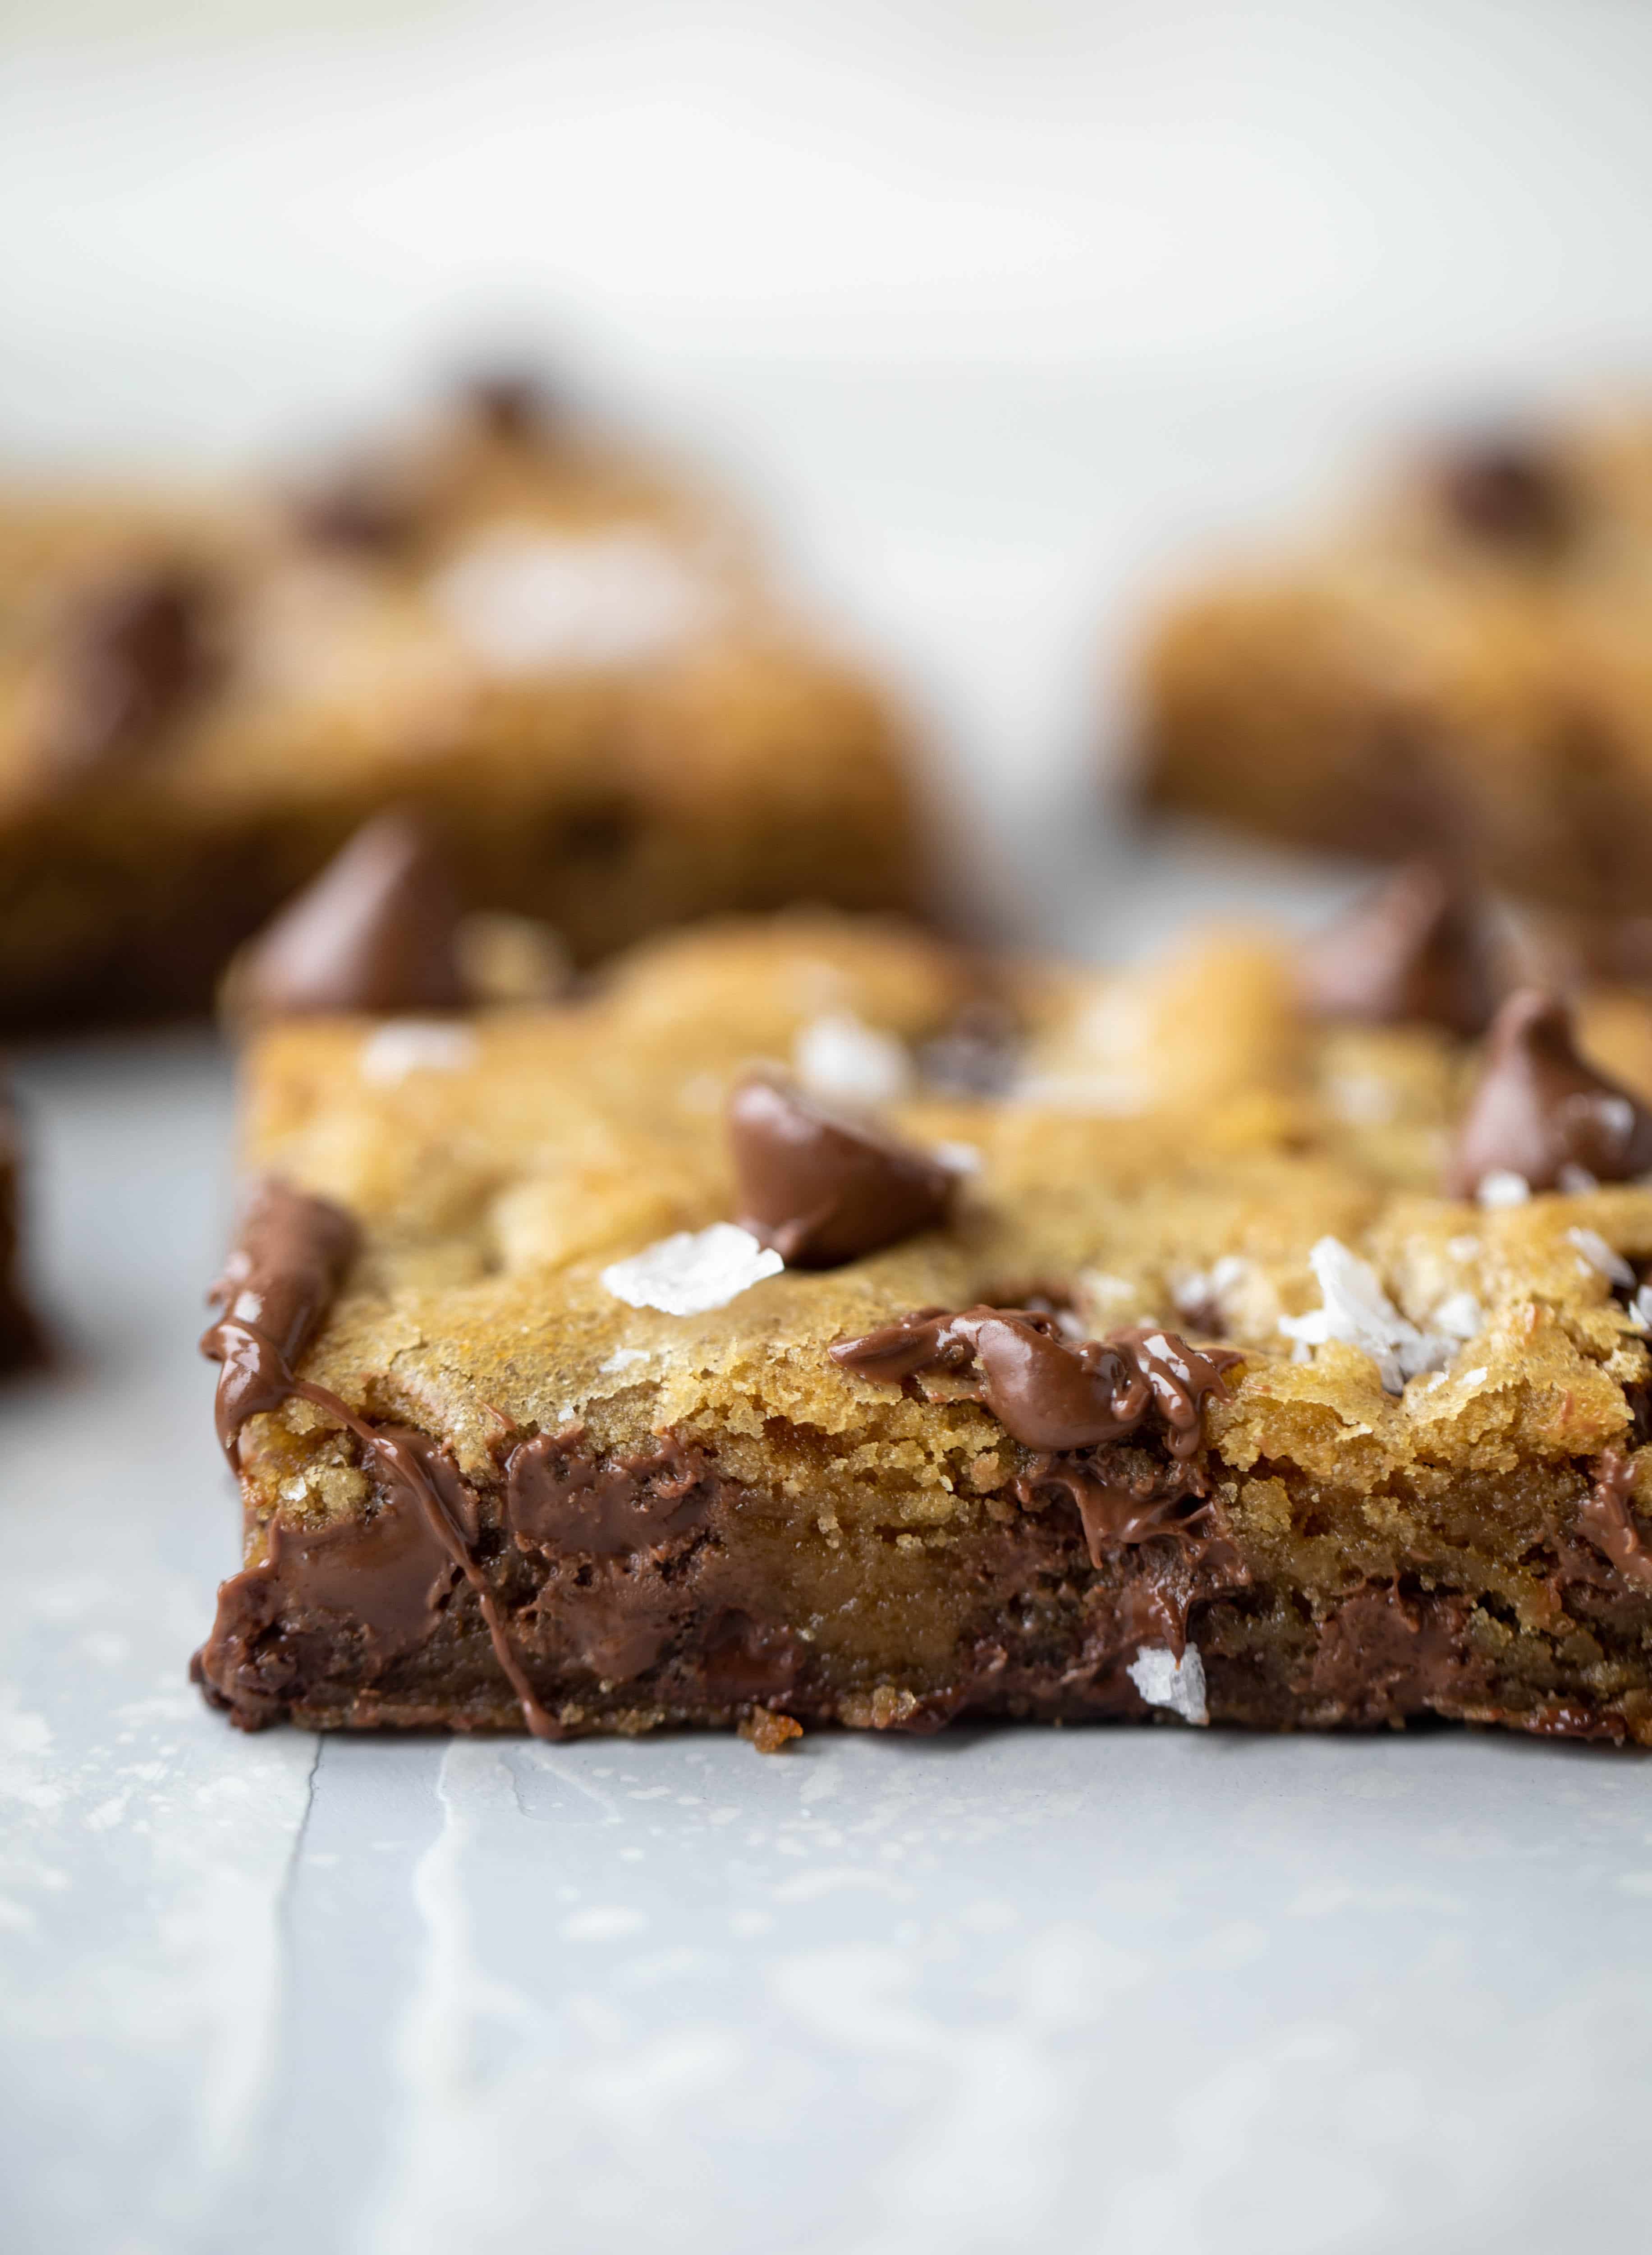 These brown butter chocolate chip cookie bars are chewy, chocolately and sprinkled with flaky salt. What else do you need in life?!